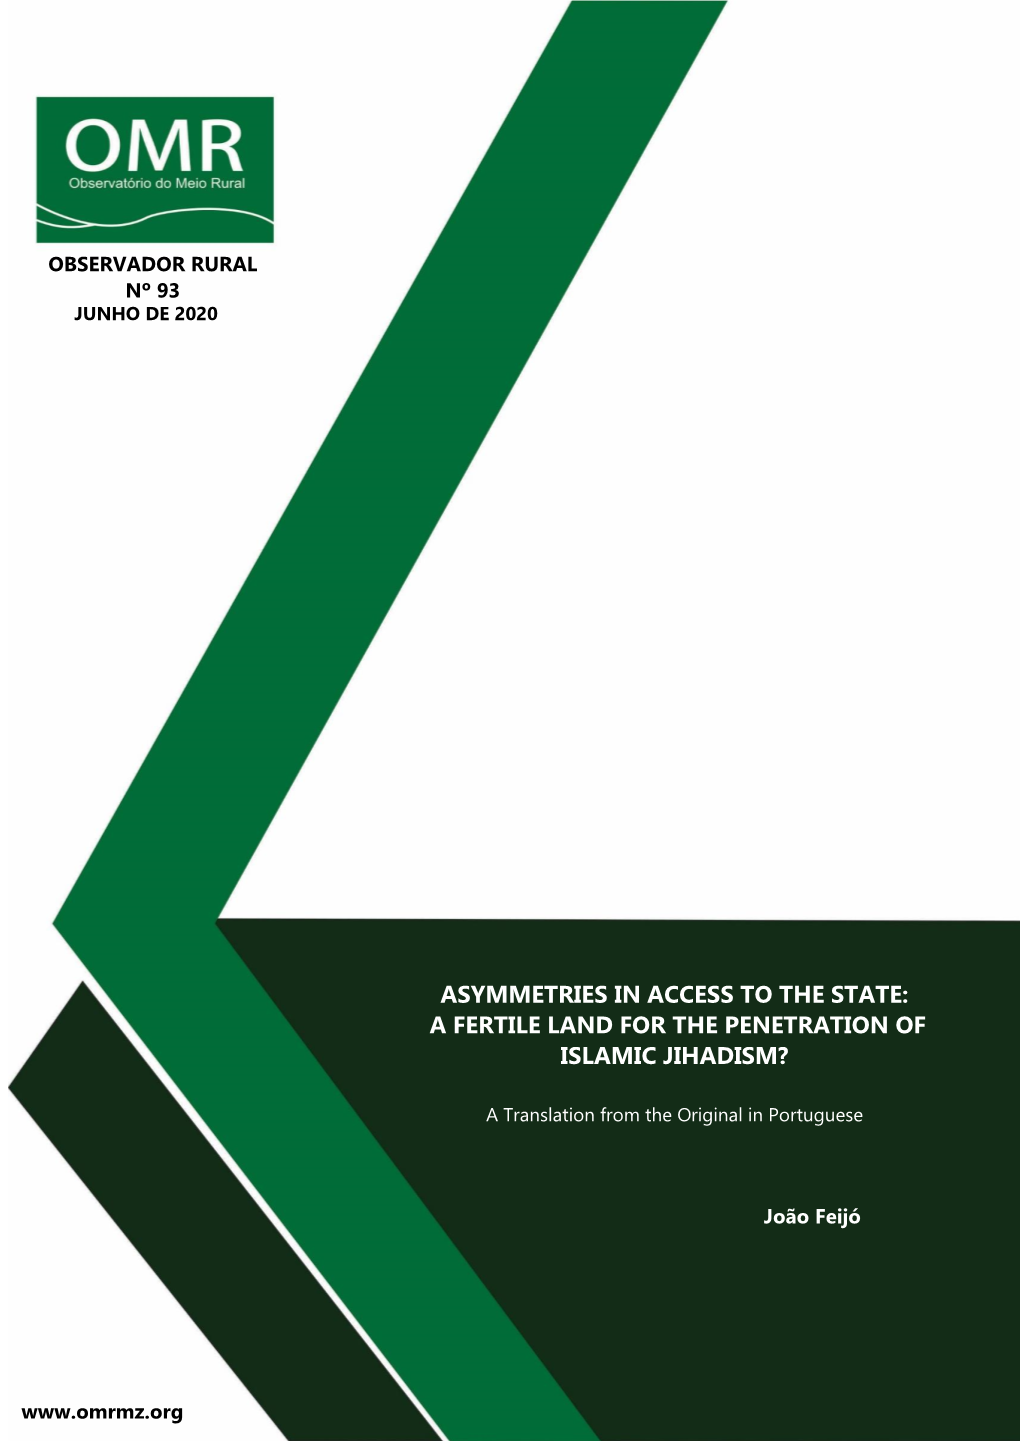 Asymmetries in Access to the State: a Fertile Land for the Penetration of Islamic Jihadism?